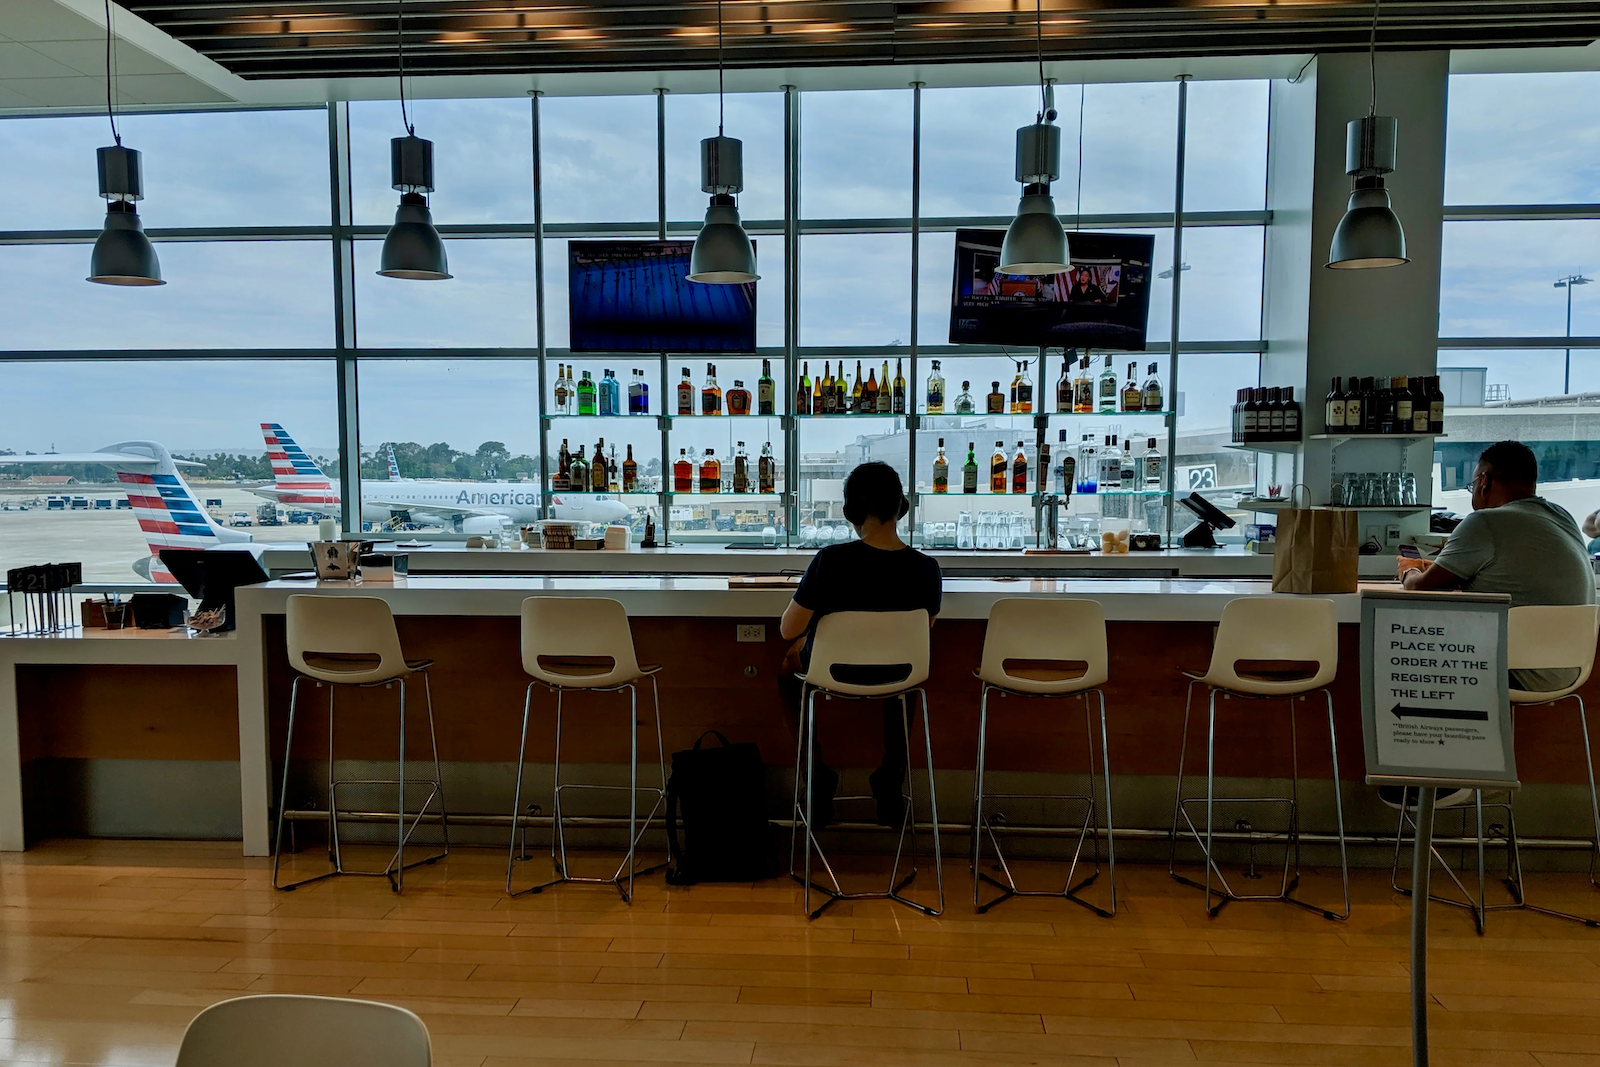 windows behind the bar in an airport lounge allow for seeing planes on the runway